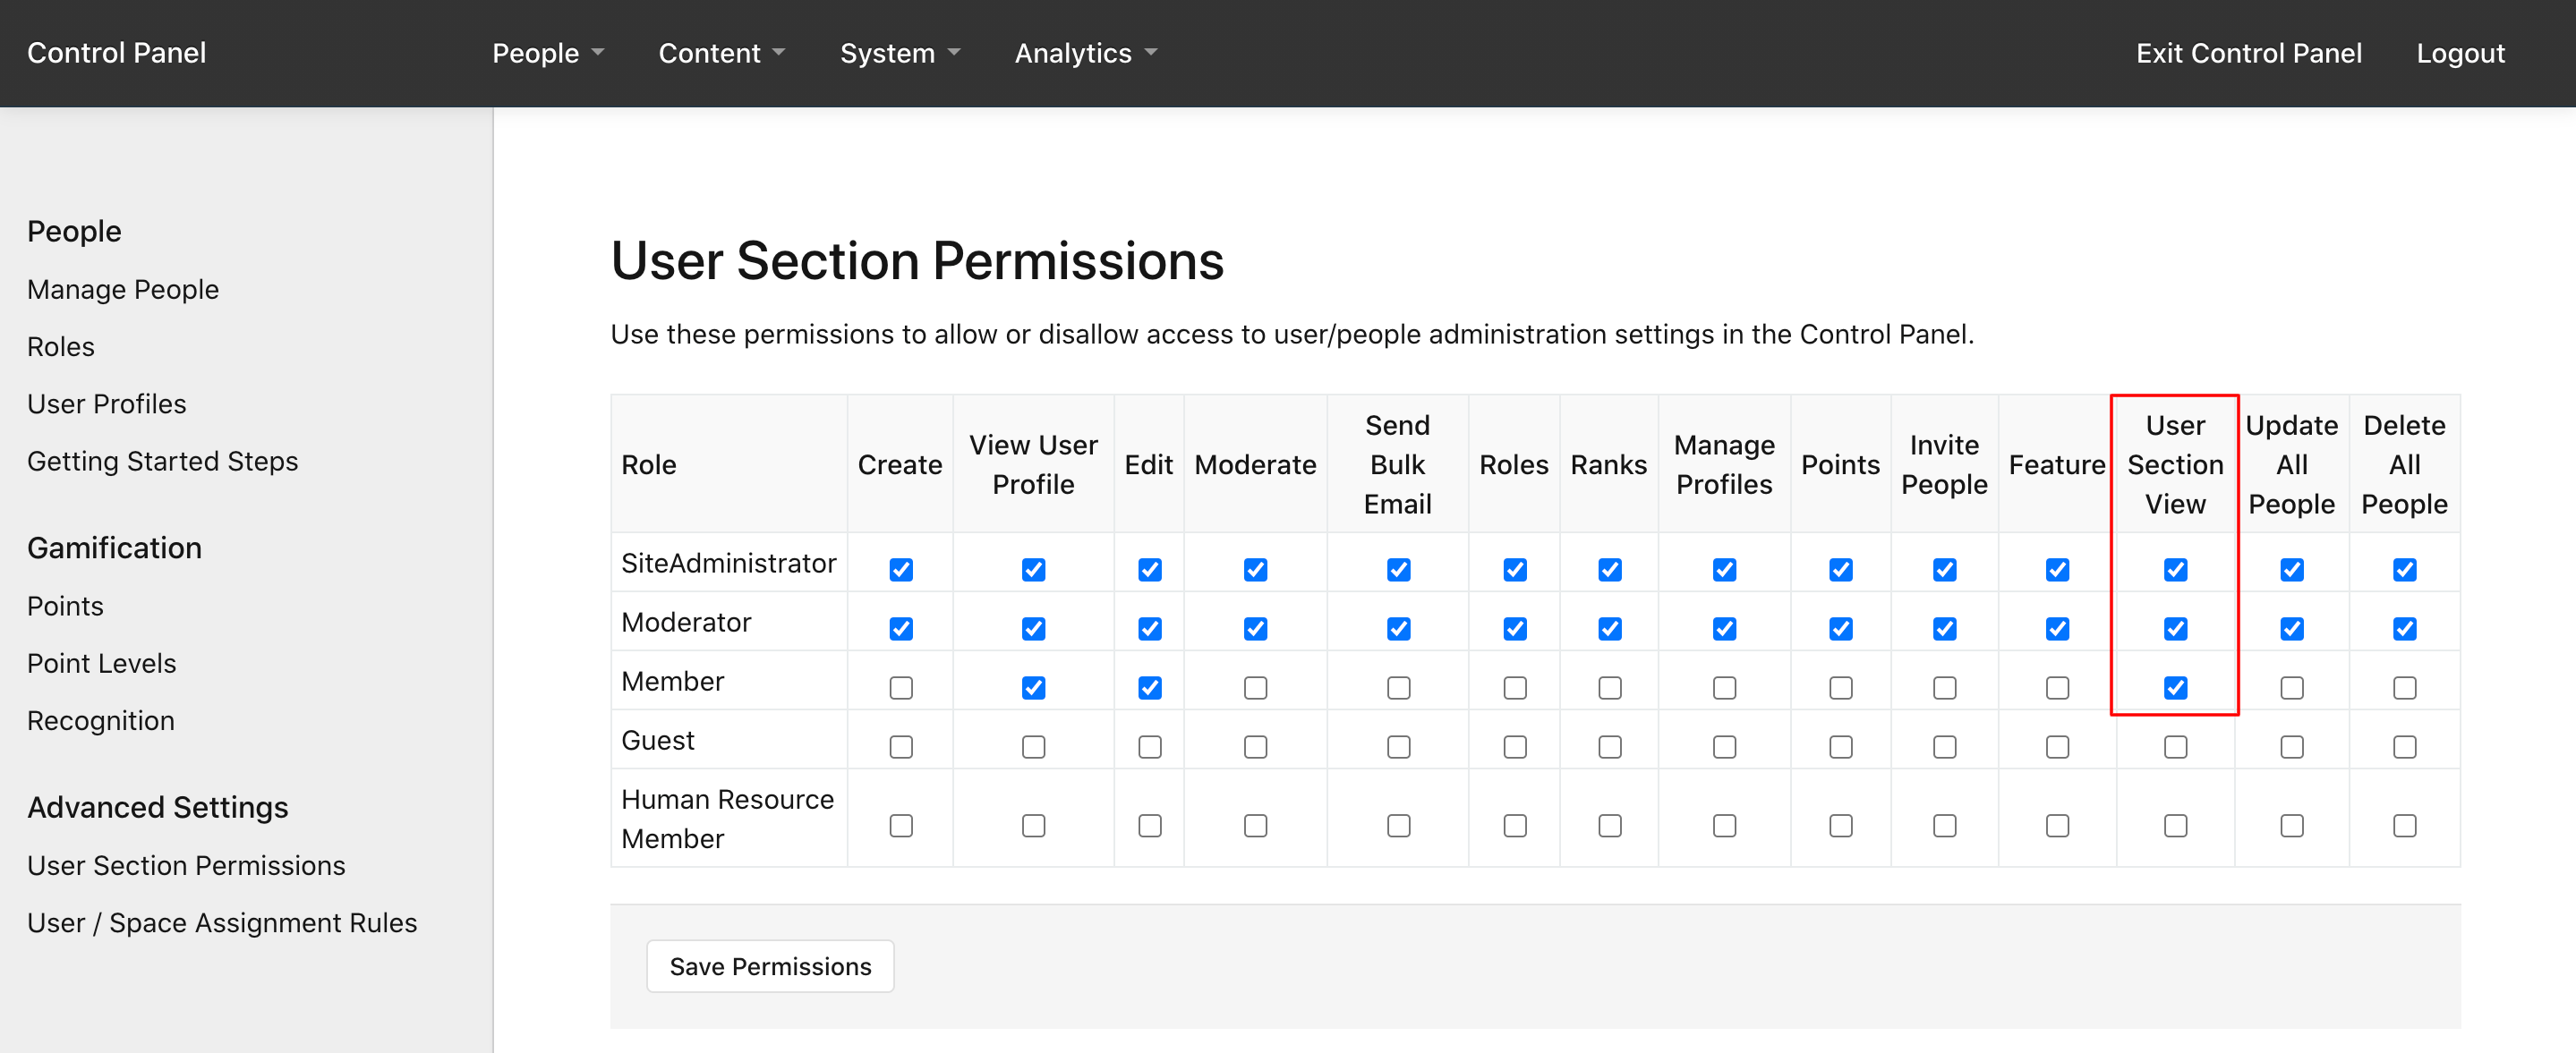 The User Section View permission